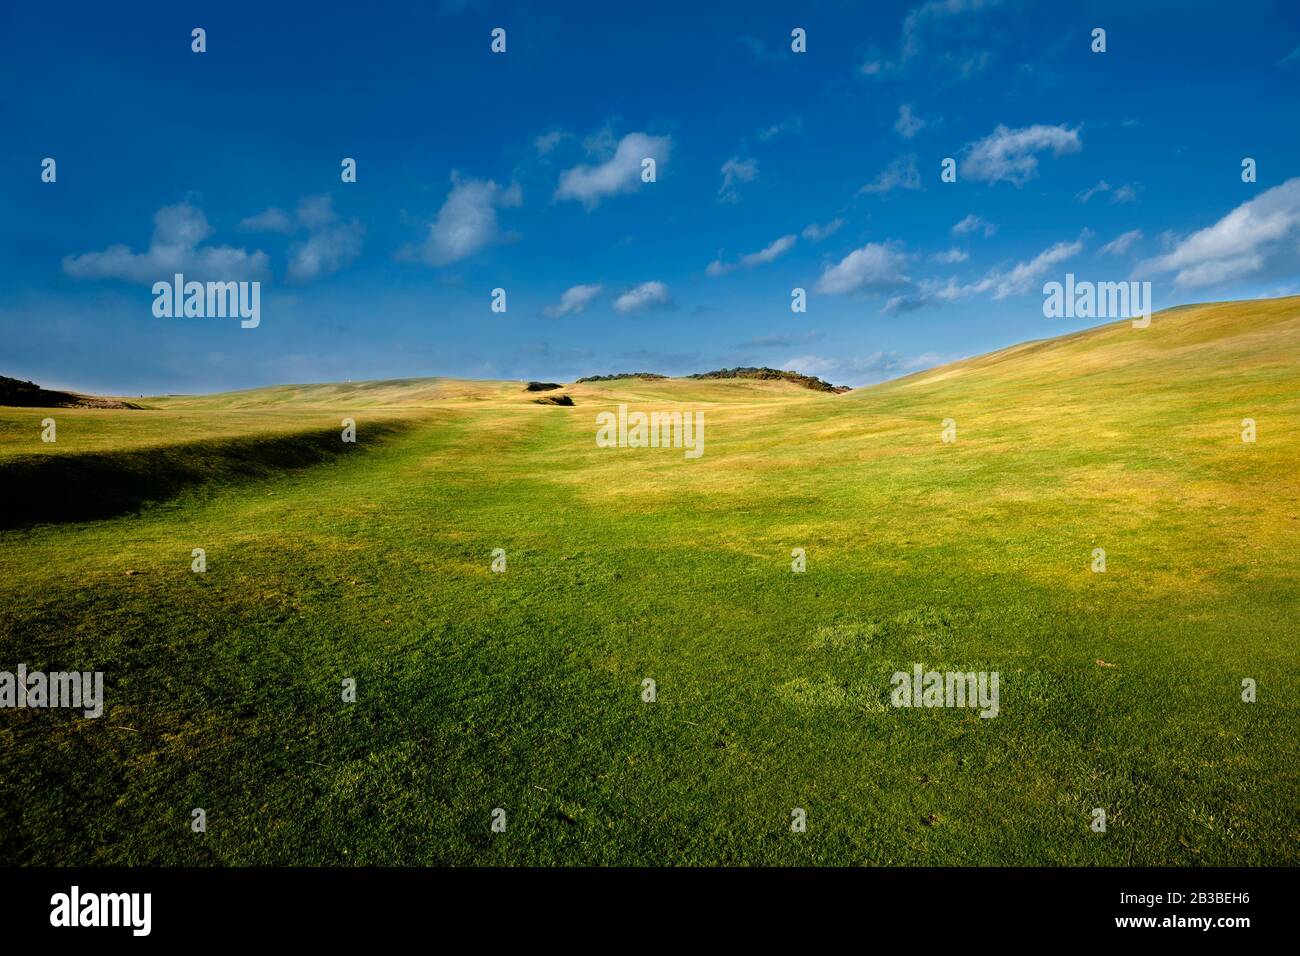 Landscape, Aberdeen Golf Club with clouds and grass field. Nigg Bay, Scotland. Stock Photo